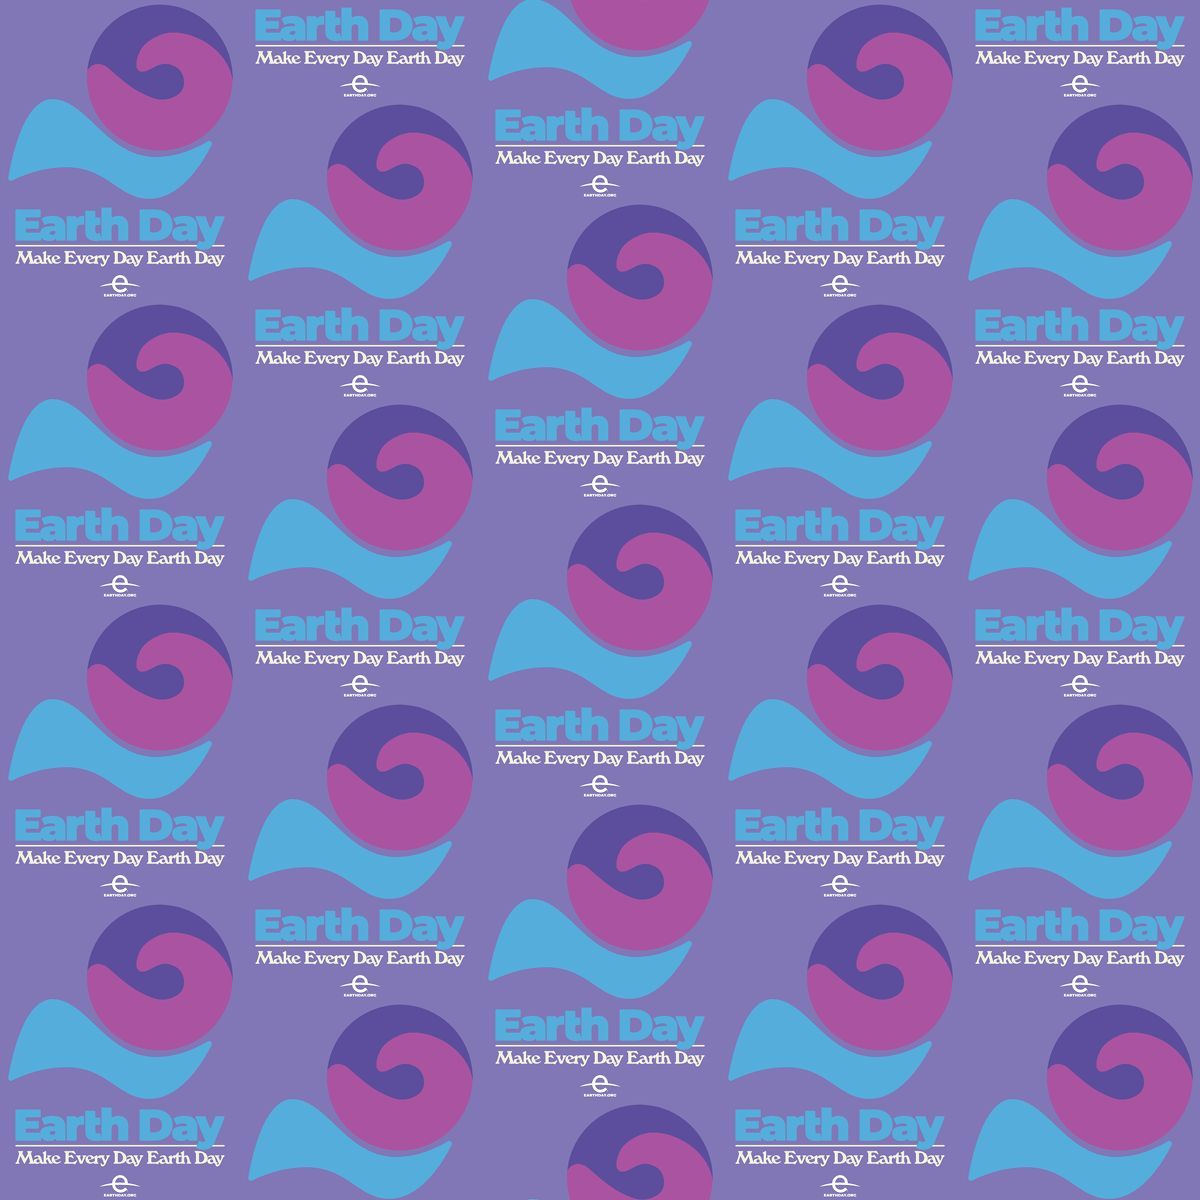 🙈 Cheeky bit of repeat pattern design using the official #EarthDay posters, which is your fave - green or purple??? 💚 💜 😊 Would love to get this onto some shirts 👔 #EarthDay #PlanetvsPlastic #EarthDayPattern #Patterns #RepeatPatternDesigns #BestShirts #ShirtDesigner